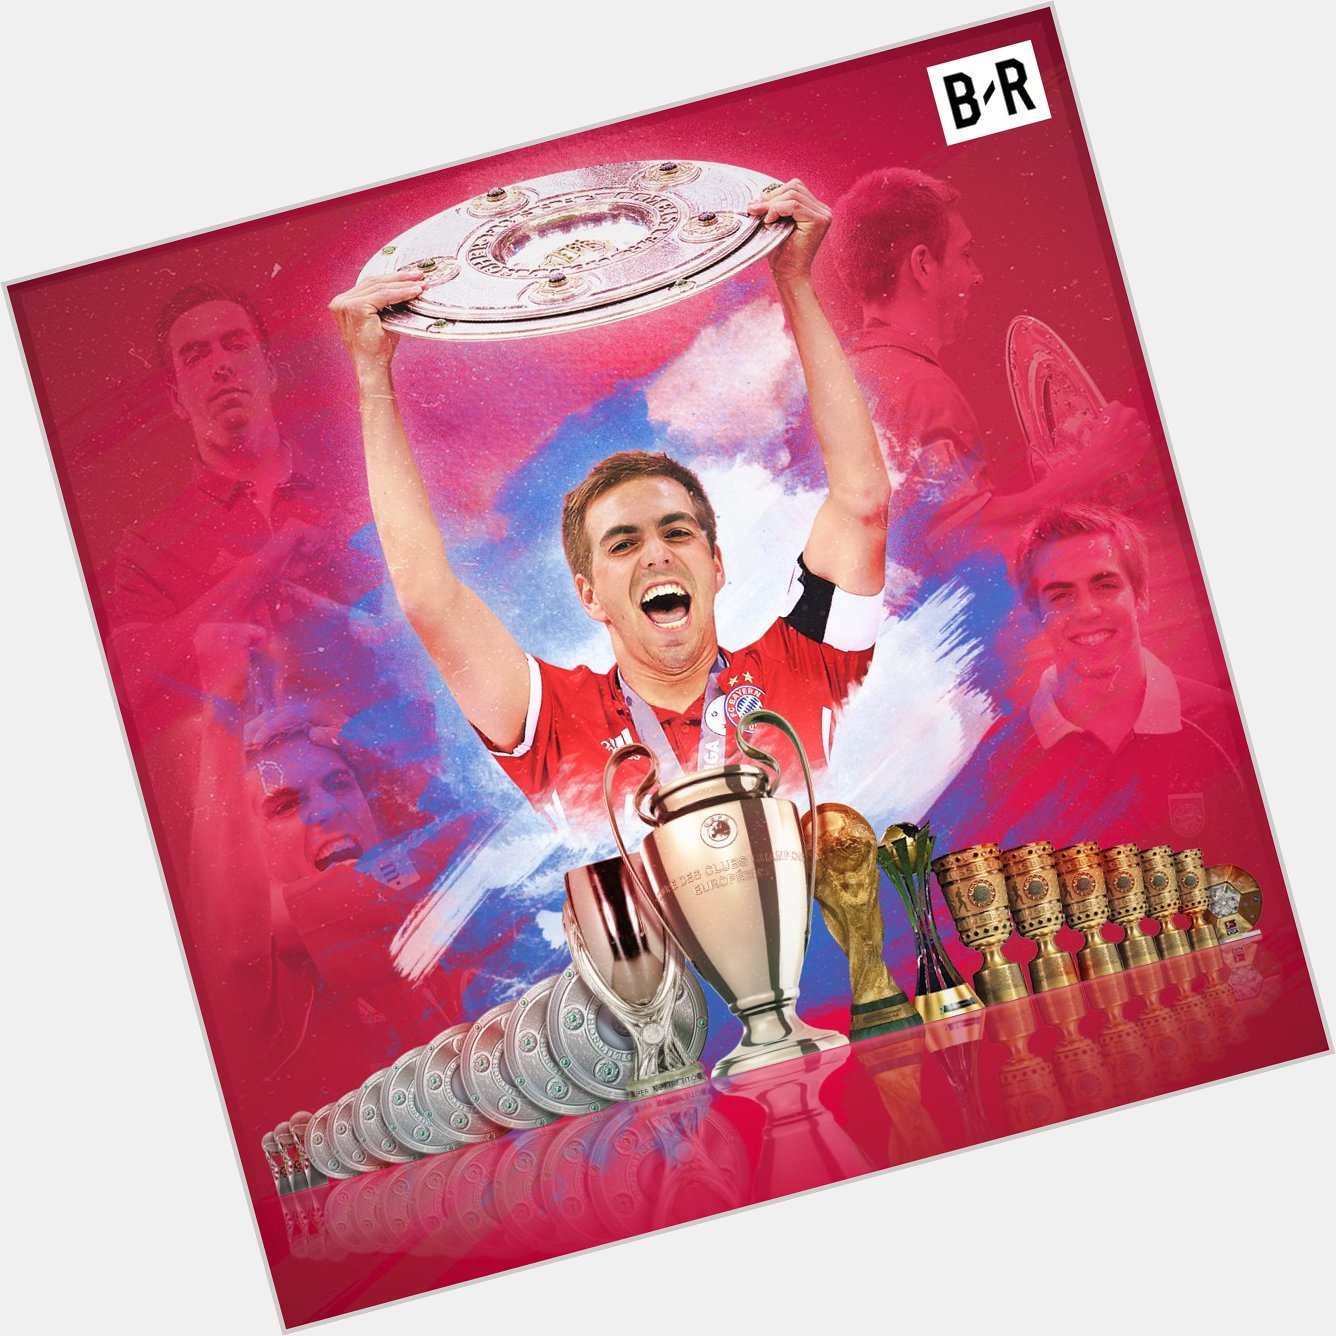 Happy 38th birthday to Bayern and Germany legend Philipp Lahm! What a career 